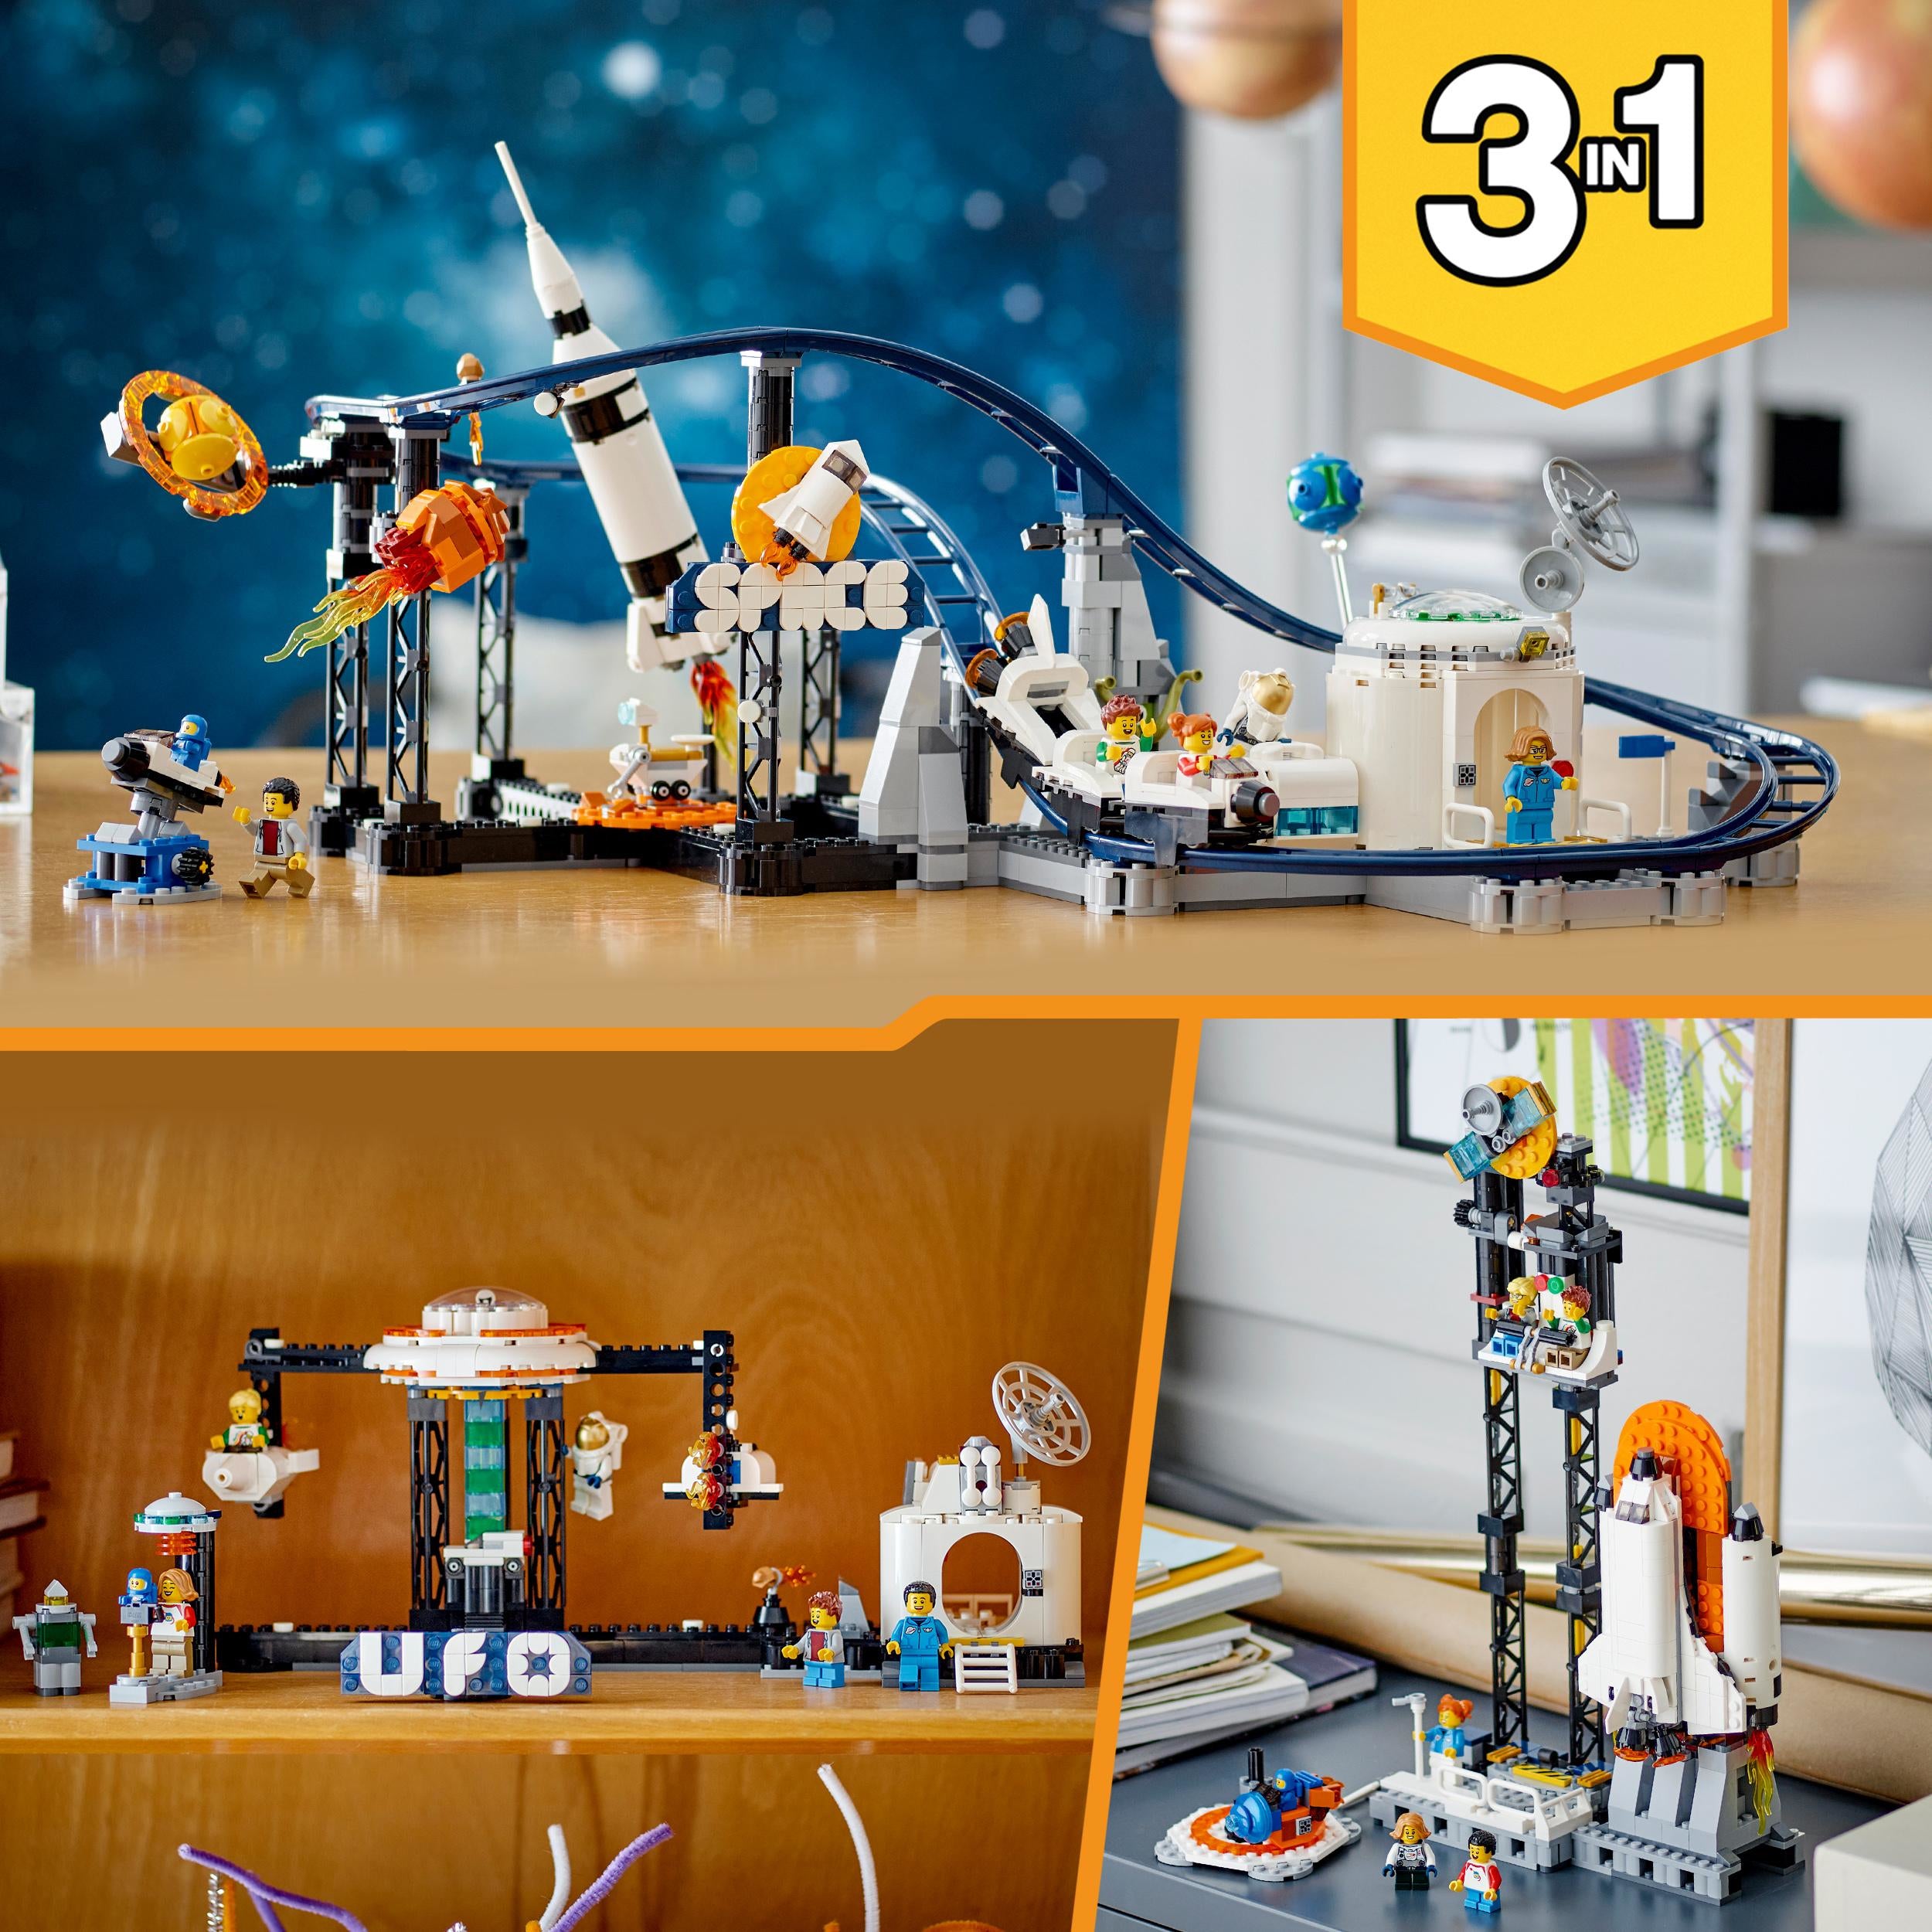 LEGO 31142 Creator 3in1 Space Roller Coaster to Drop Tower or Merry-Go-Round Set, Fairgound Ride Models, Building Toy with Space Rocket, Planets and Light Up Bricks